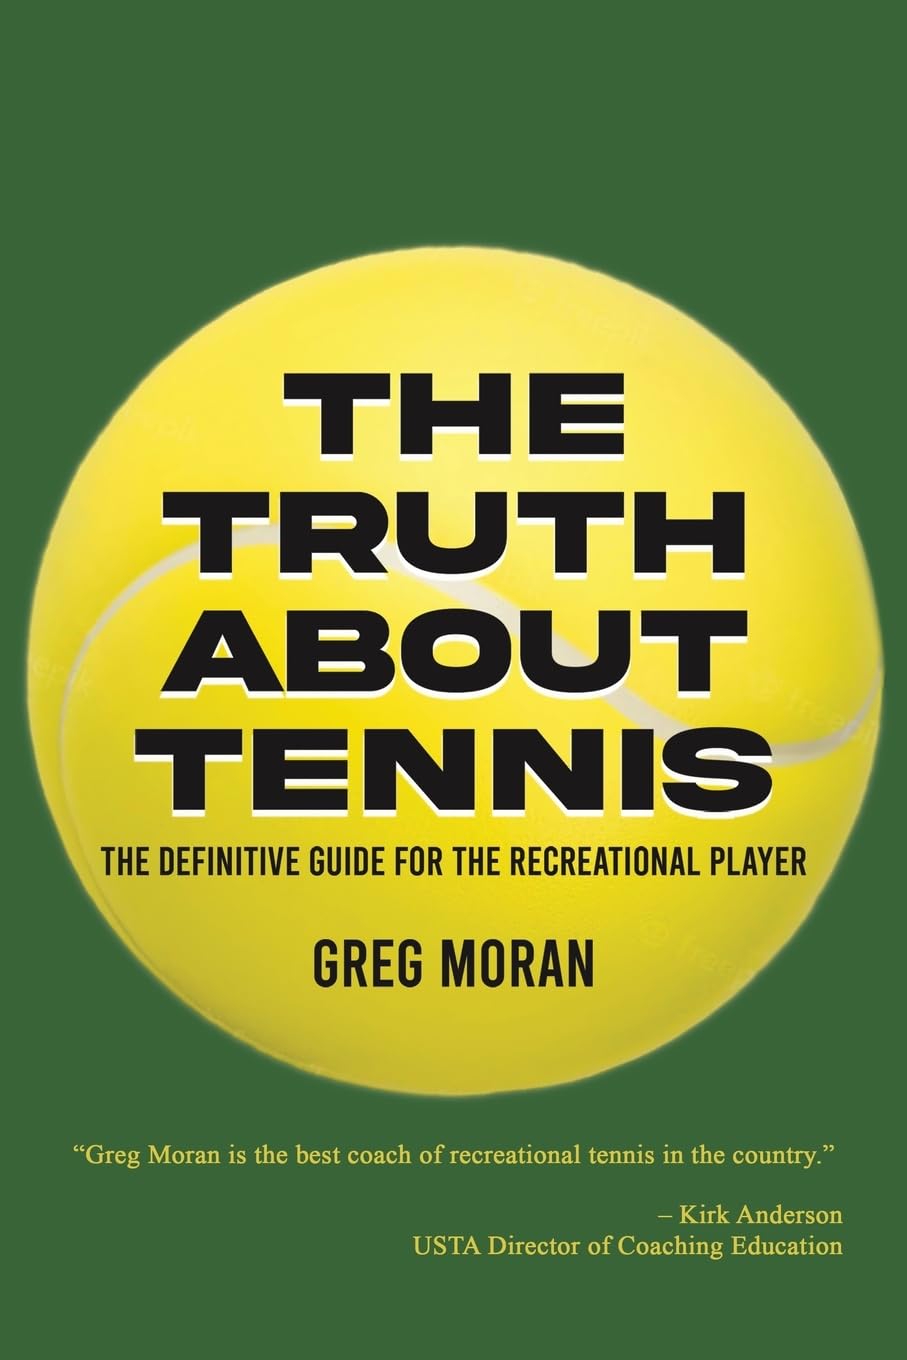 The Truth About Tennis: The Definitive Guide for the Recreational Player